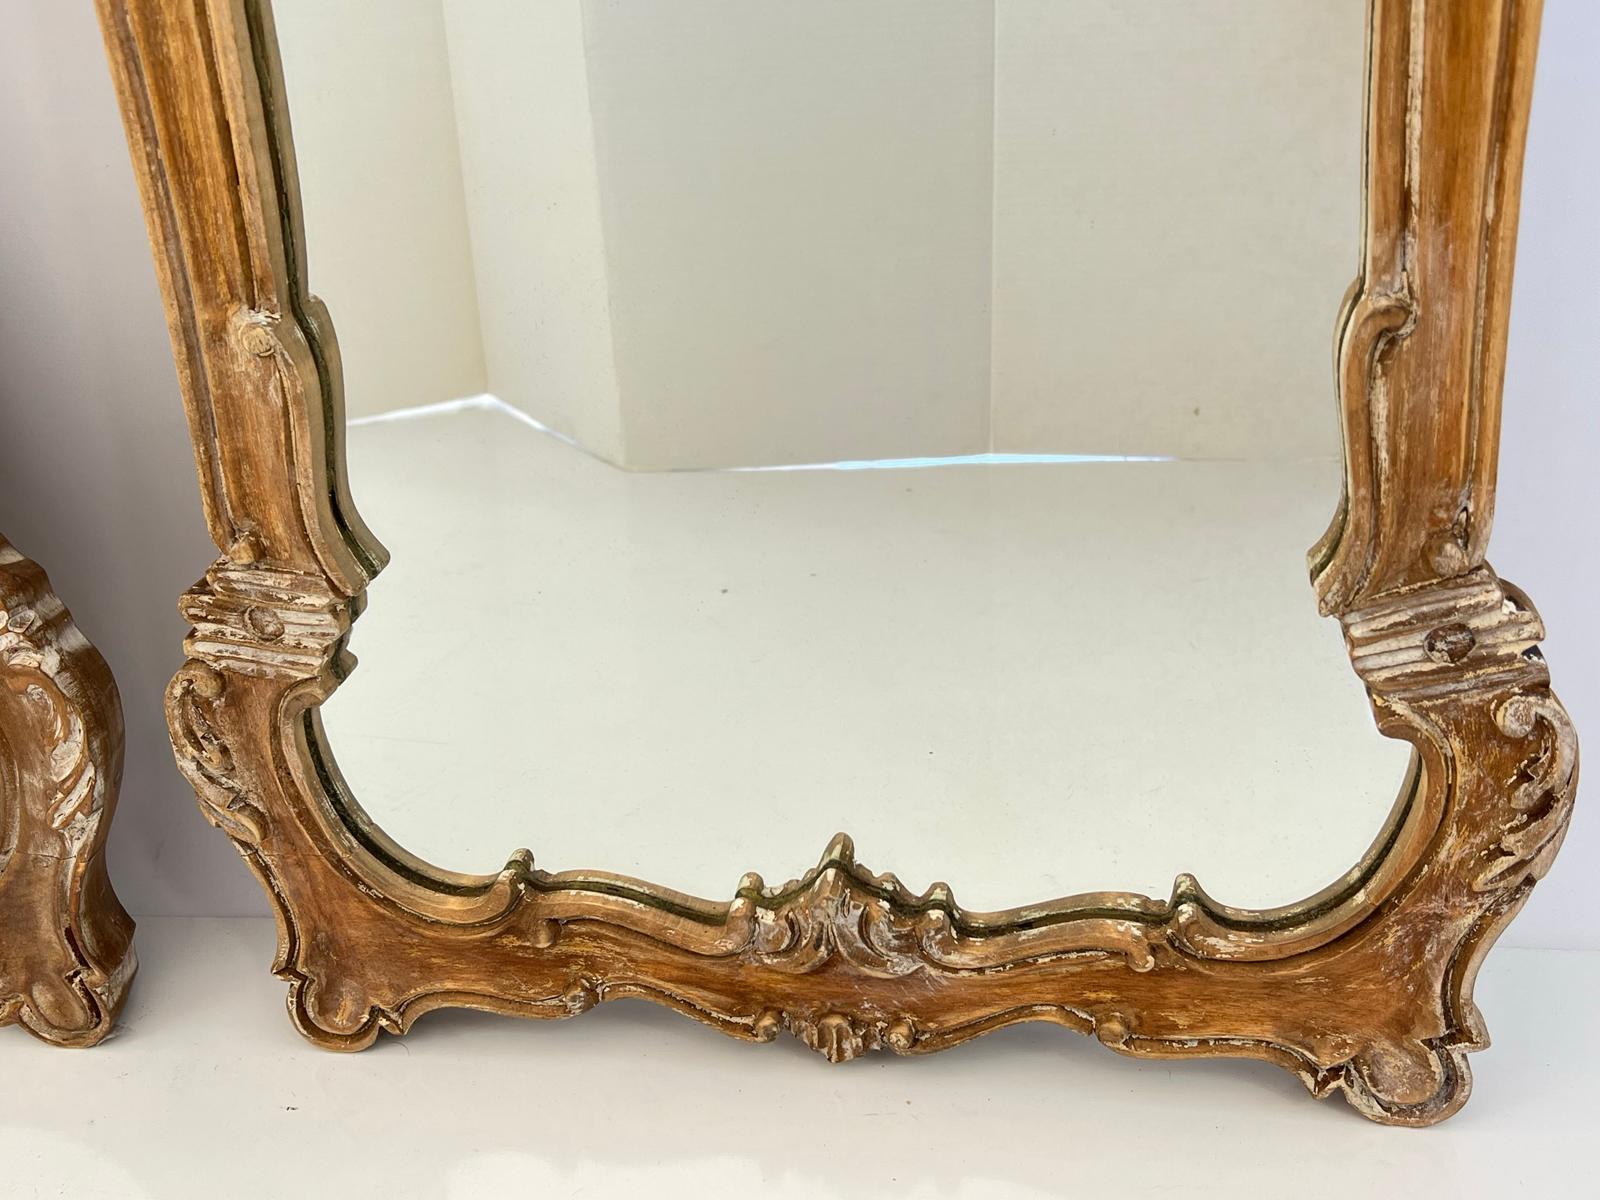 Pair of Vintage, Carved Wood, Italian Mirrors with Pickled Finish 2